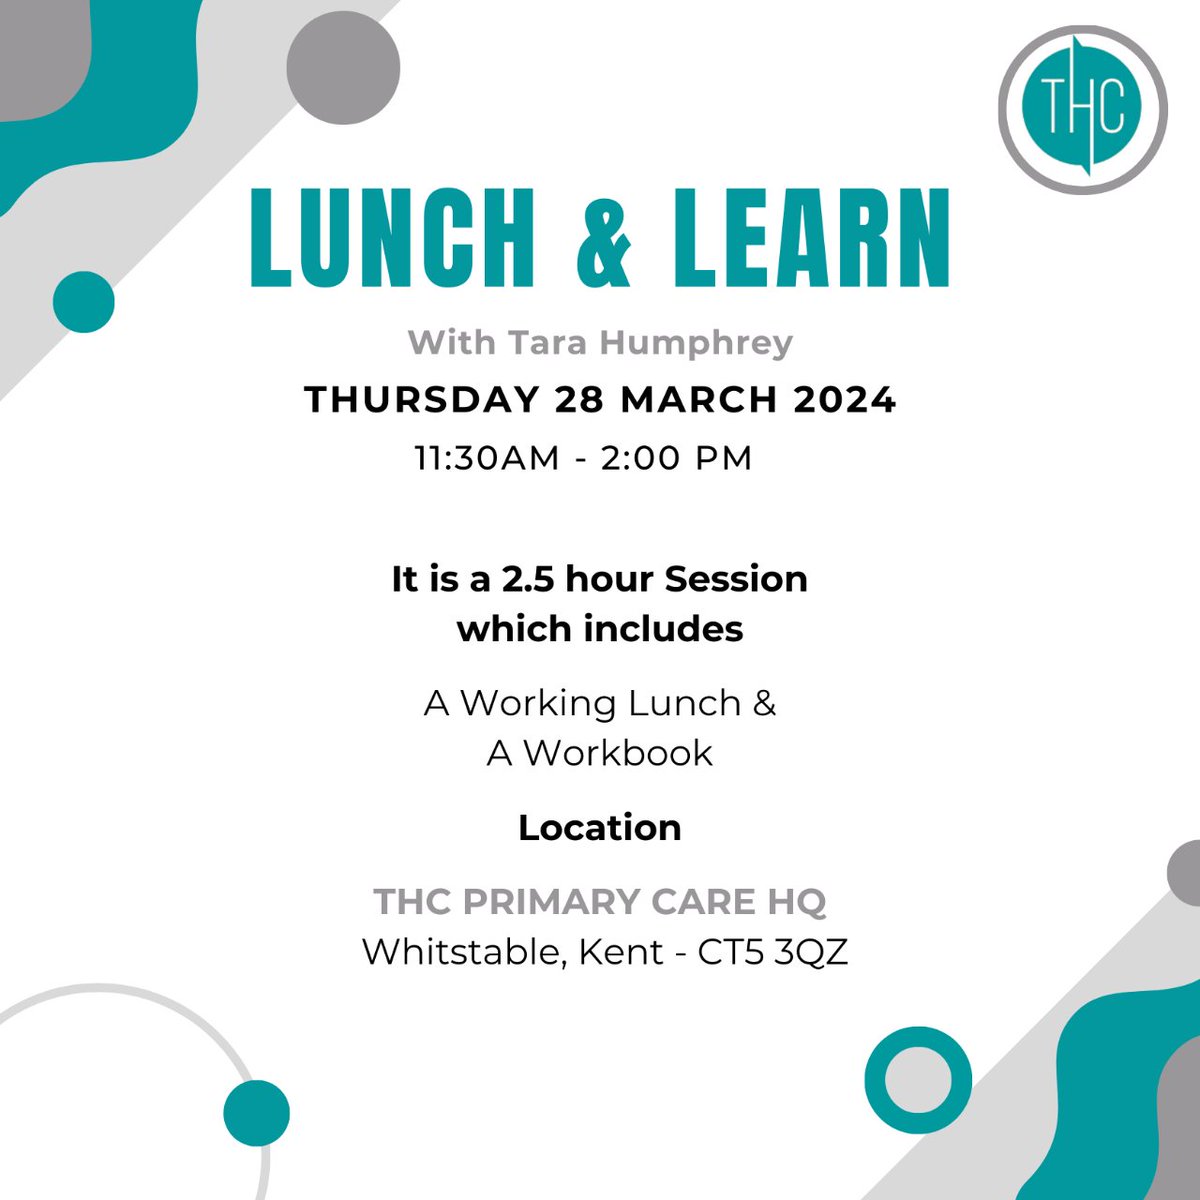 Are you a part of a #PCN Management team looking to increase your engagement? We have a lunch and learn session available in March at our HQ in Whitstable, Kent. To find out more and reserve your place - please do check out our page below 🤗 thcprimarycare.co.uk/lunch-and-learn #primarycare